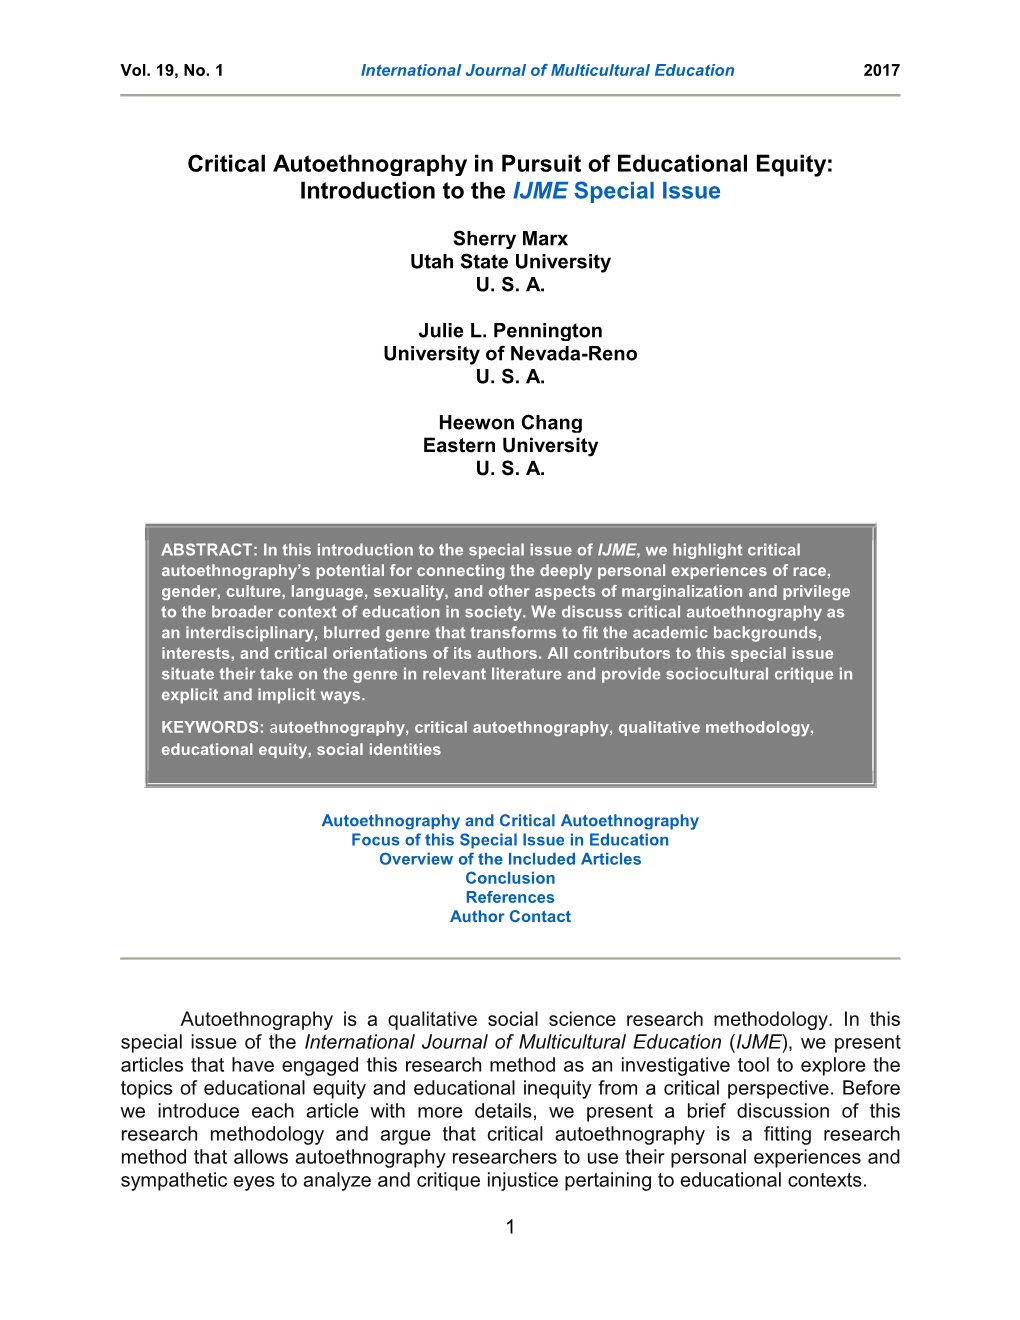 Critical Autoethnography in Pursuit of Educational Equity: Introduction to the IJME Special Issue